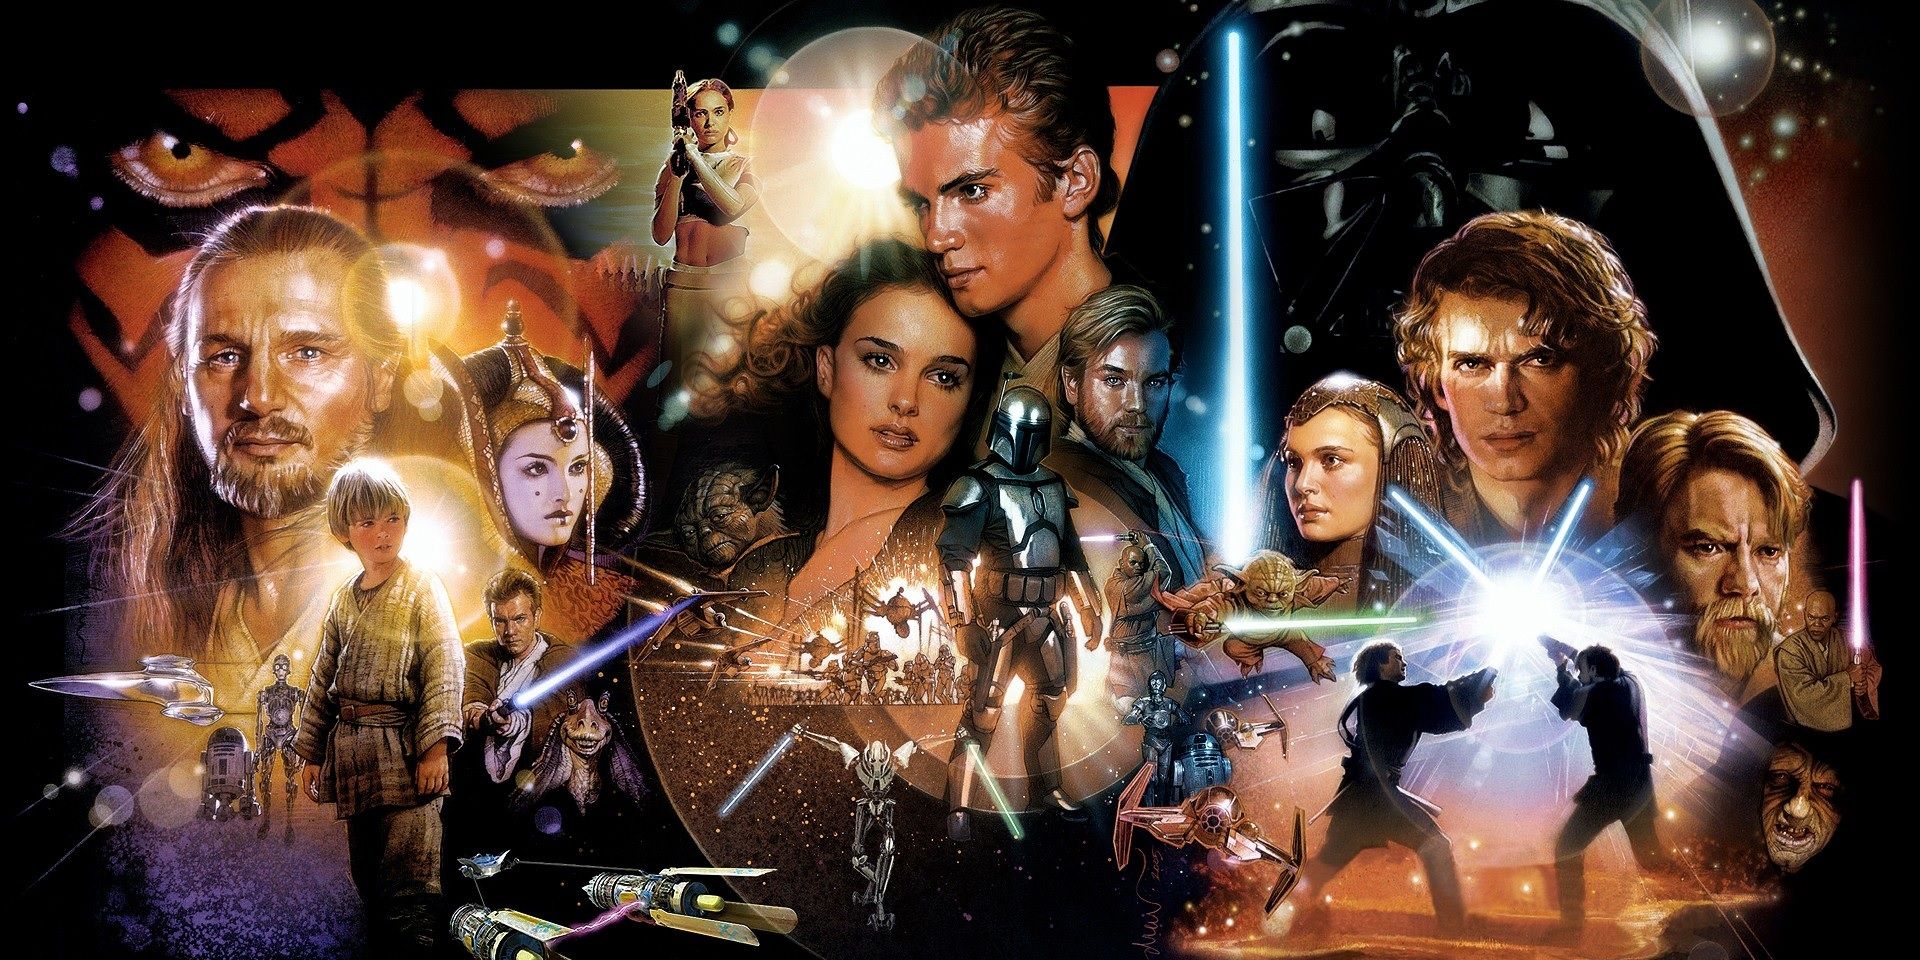 Star Wars prequel trilogy posters.